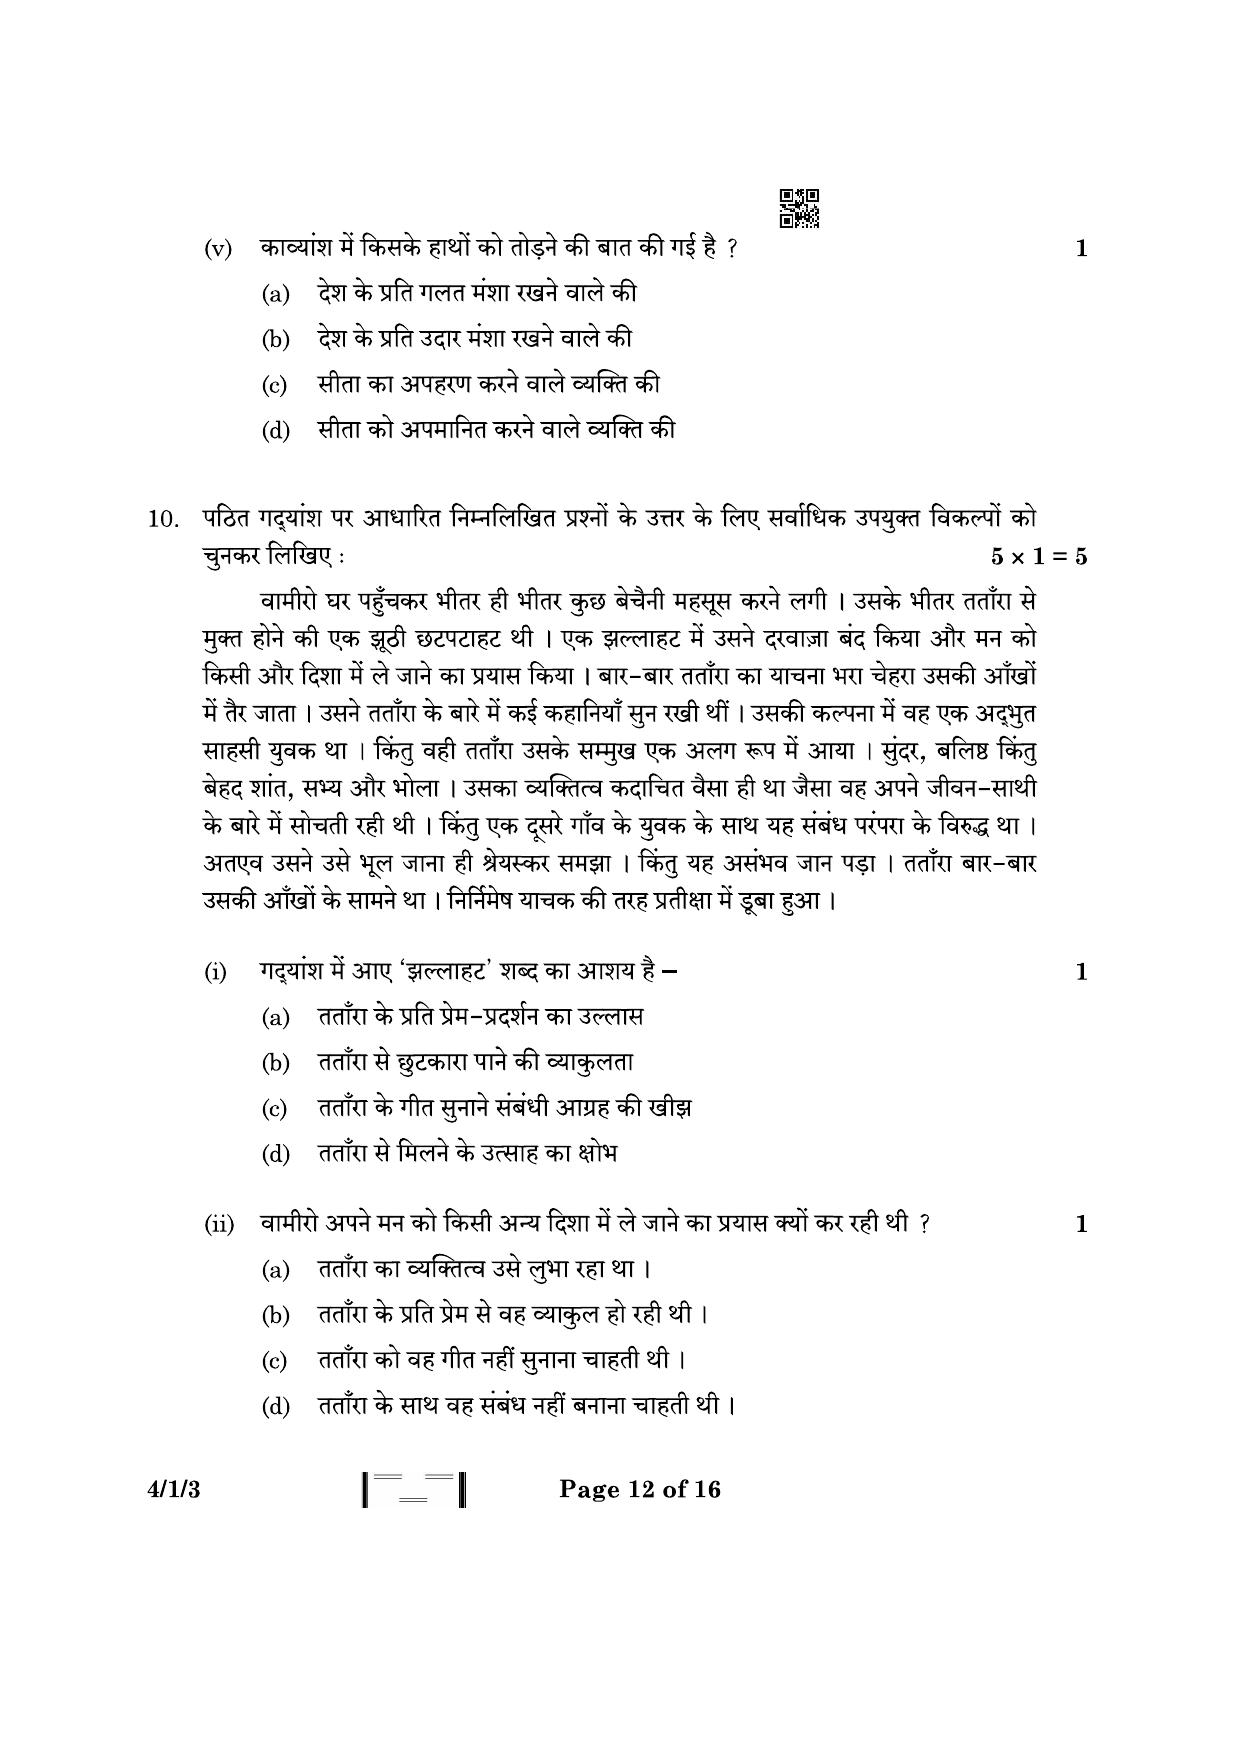 CBSE Class 10 4-1-3 Hindi B 2023 Question Paper - Page 12